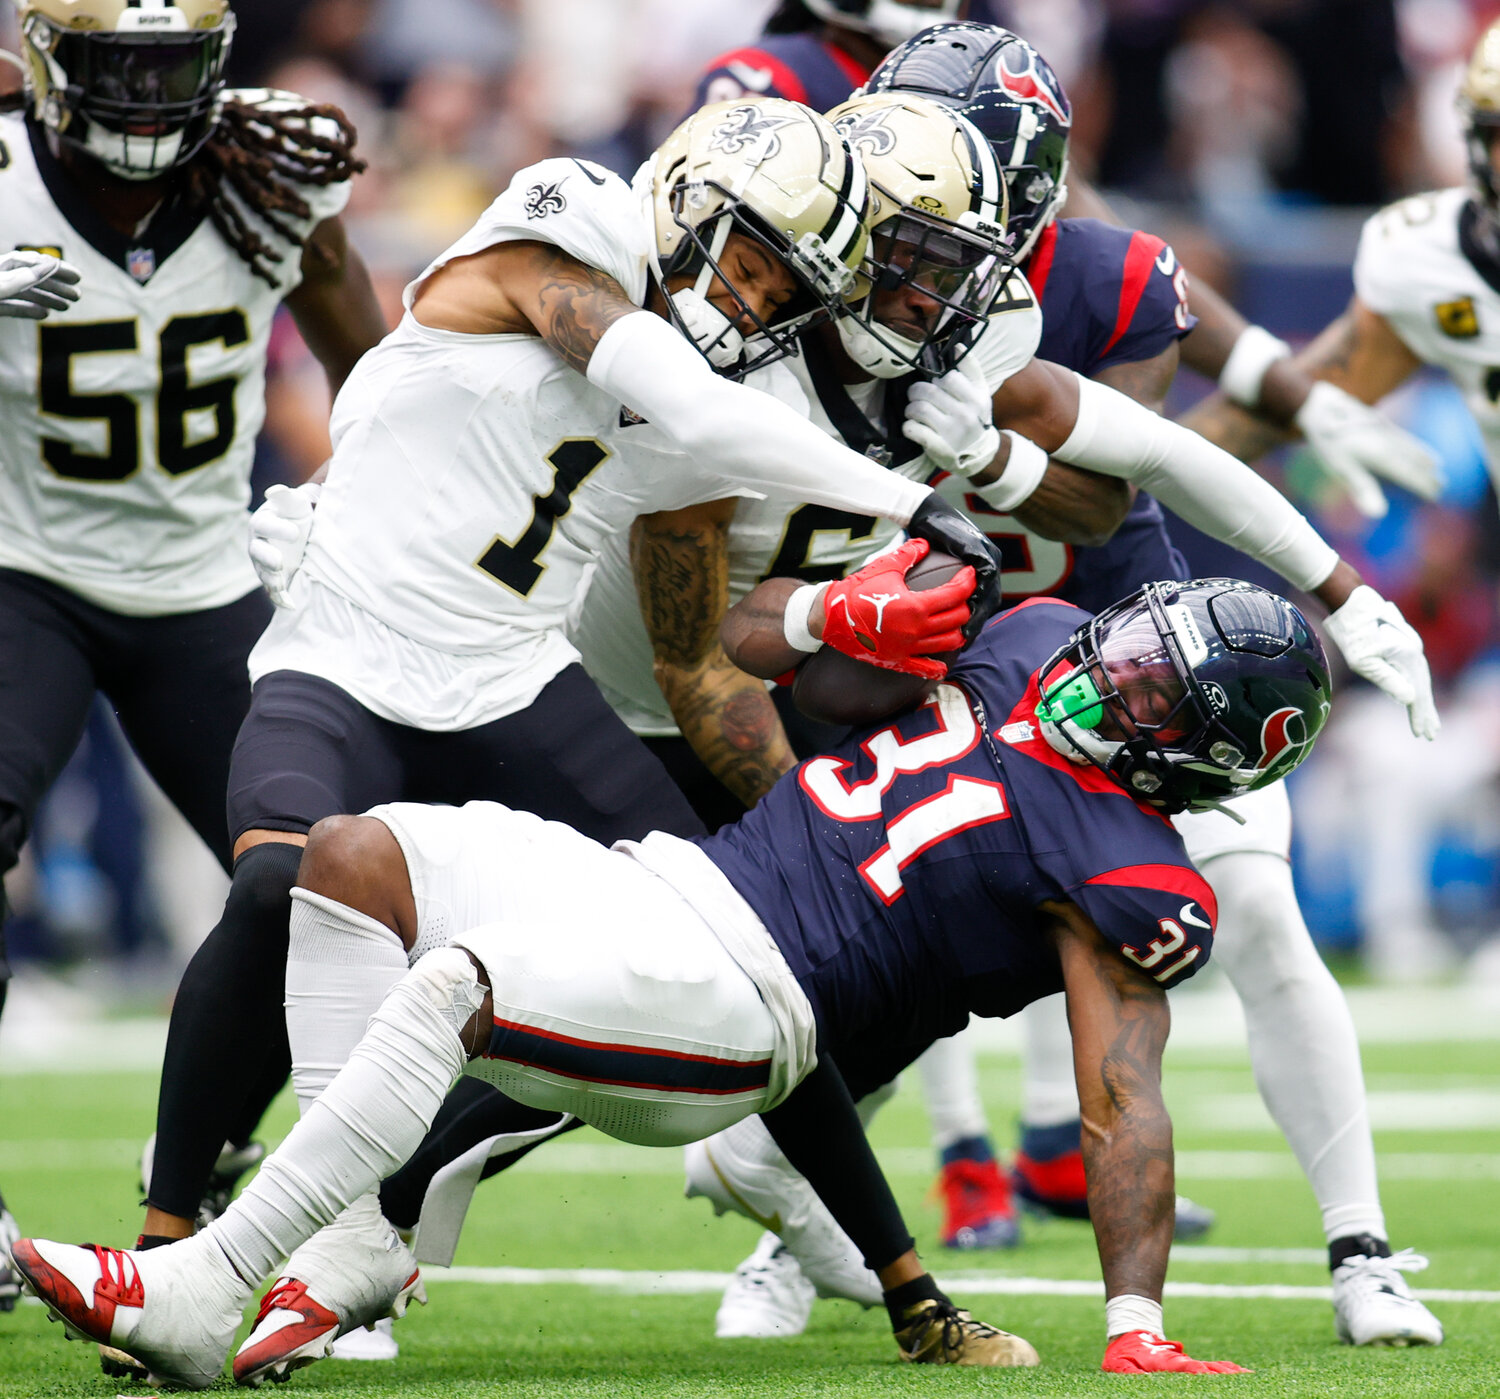 Texans running back Dameon Pierce (31) is tackled on a carry during an NFL game between the Texans and the Saints on October 15, 2023 in Houston. The Texans won, 20-13.